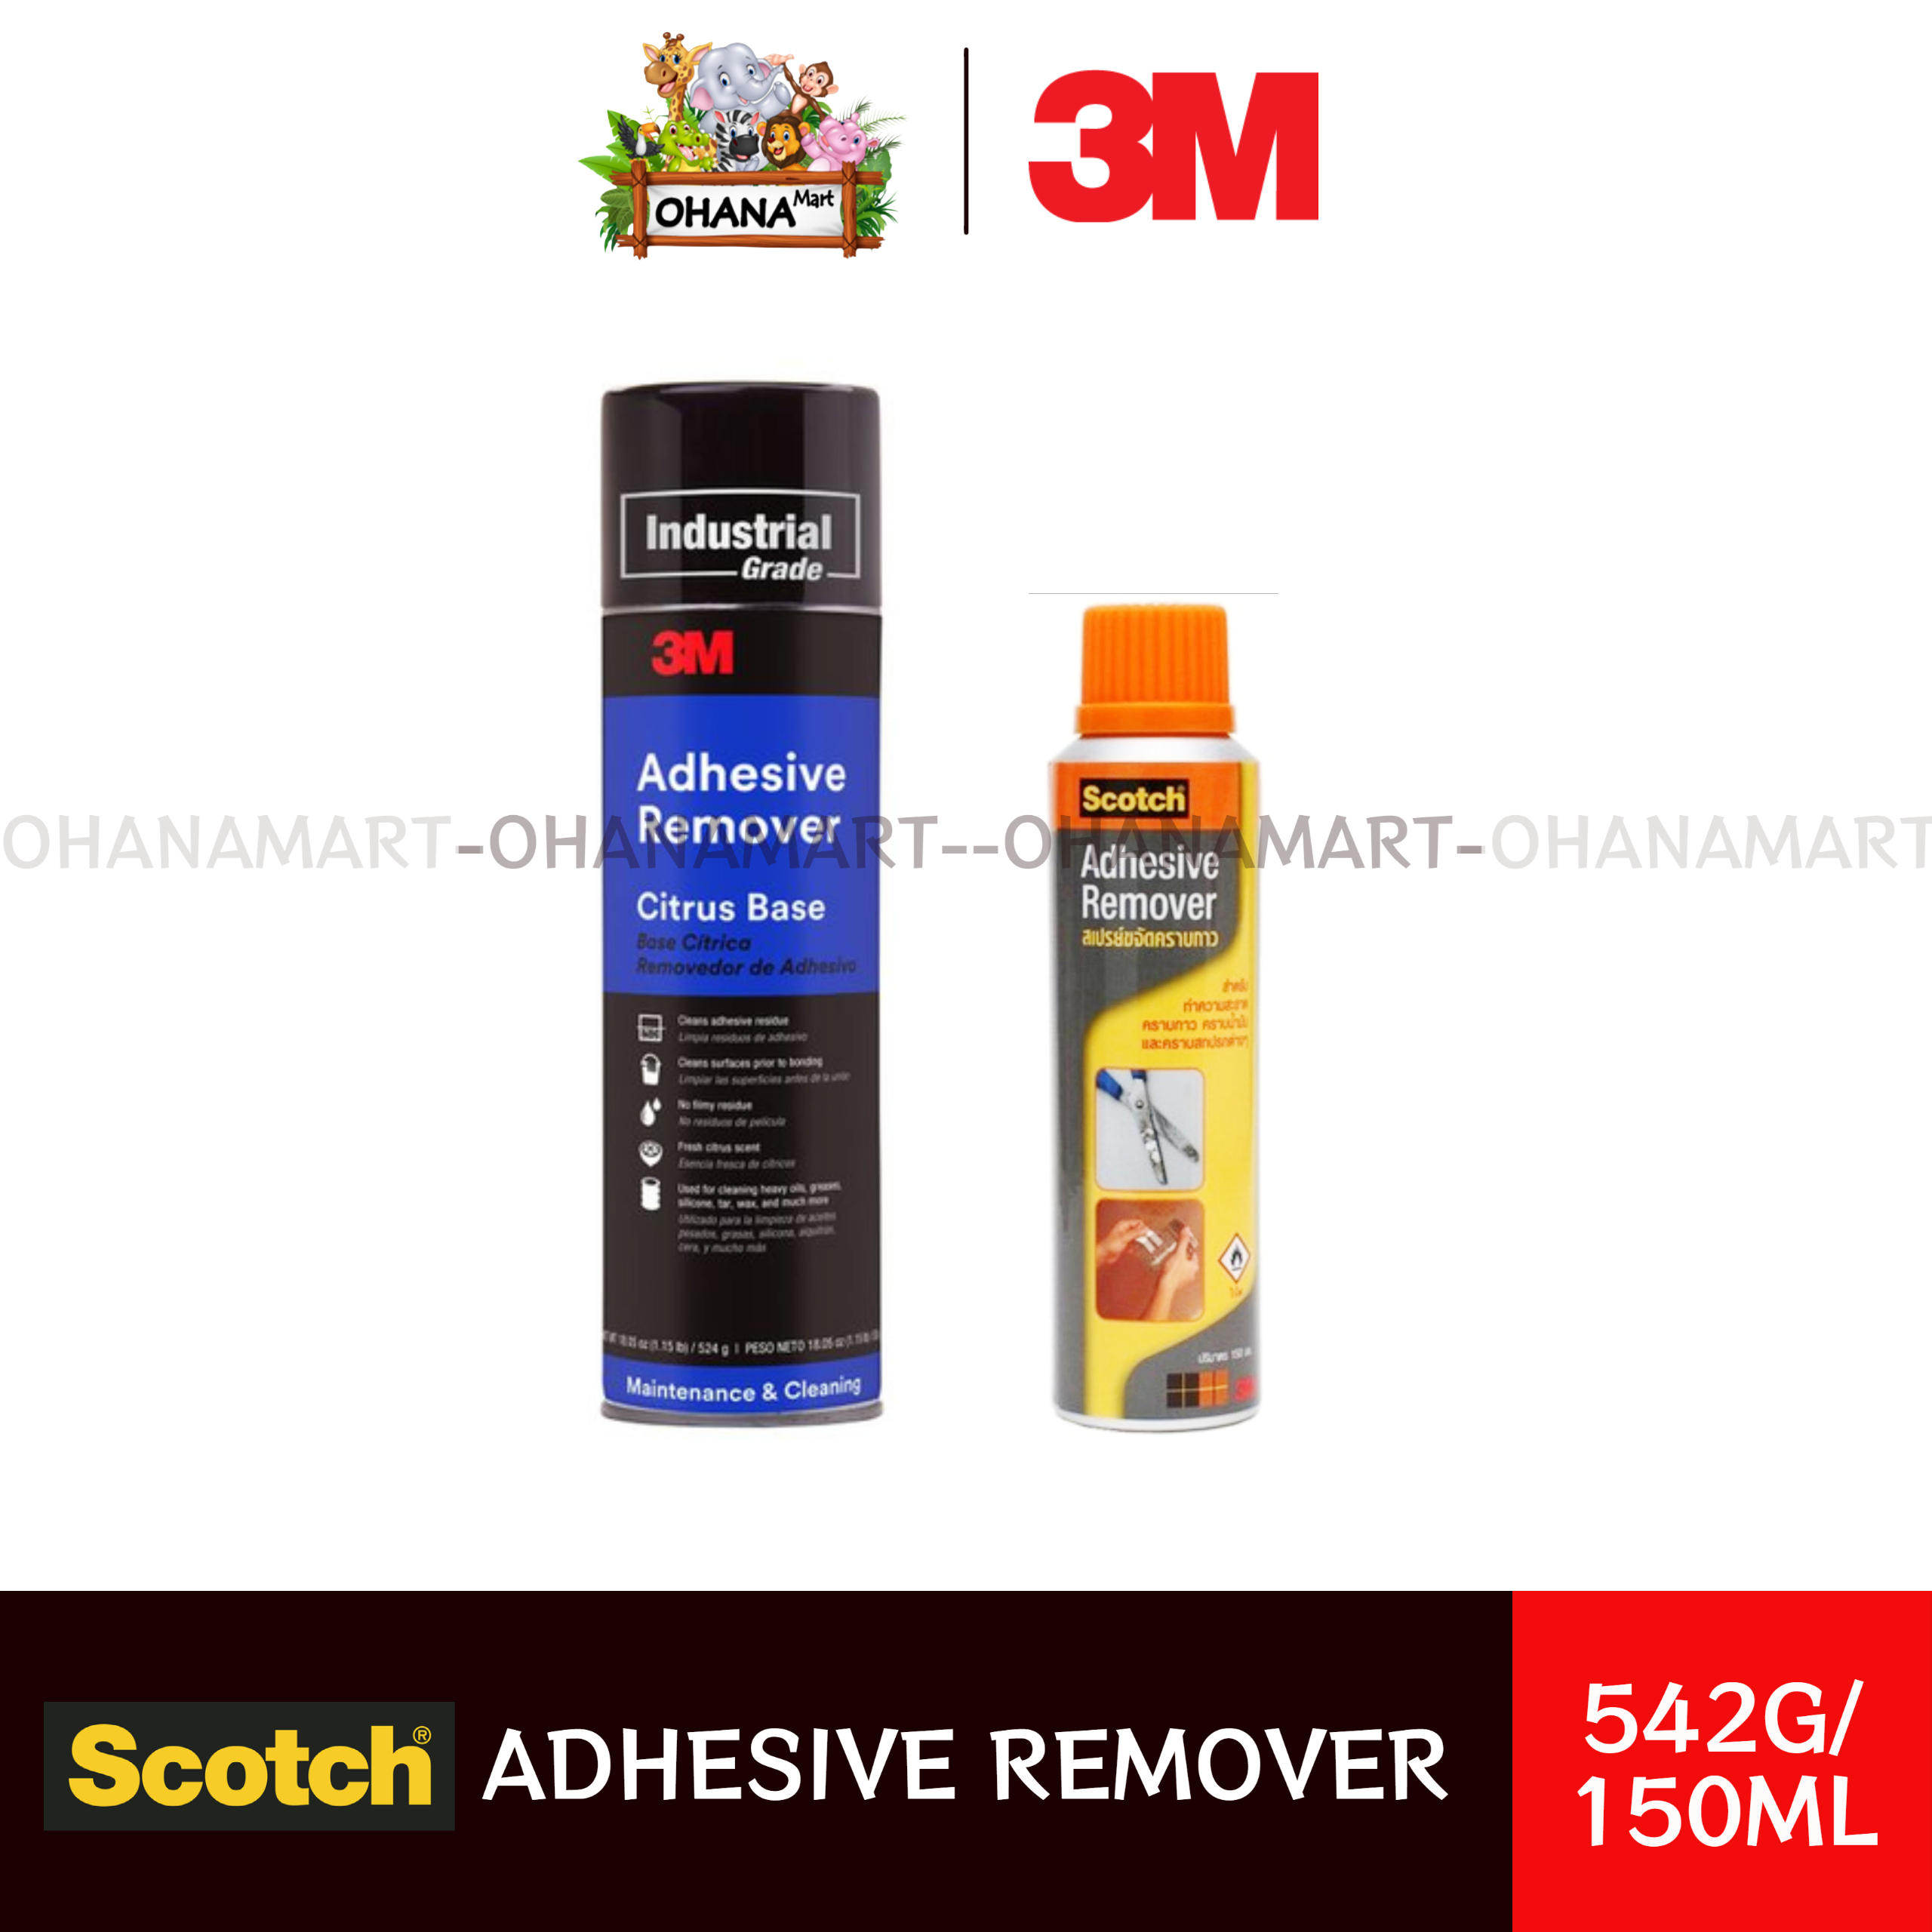 3M™ Adhesive Remover